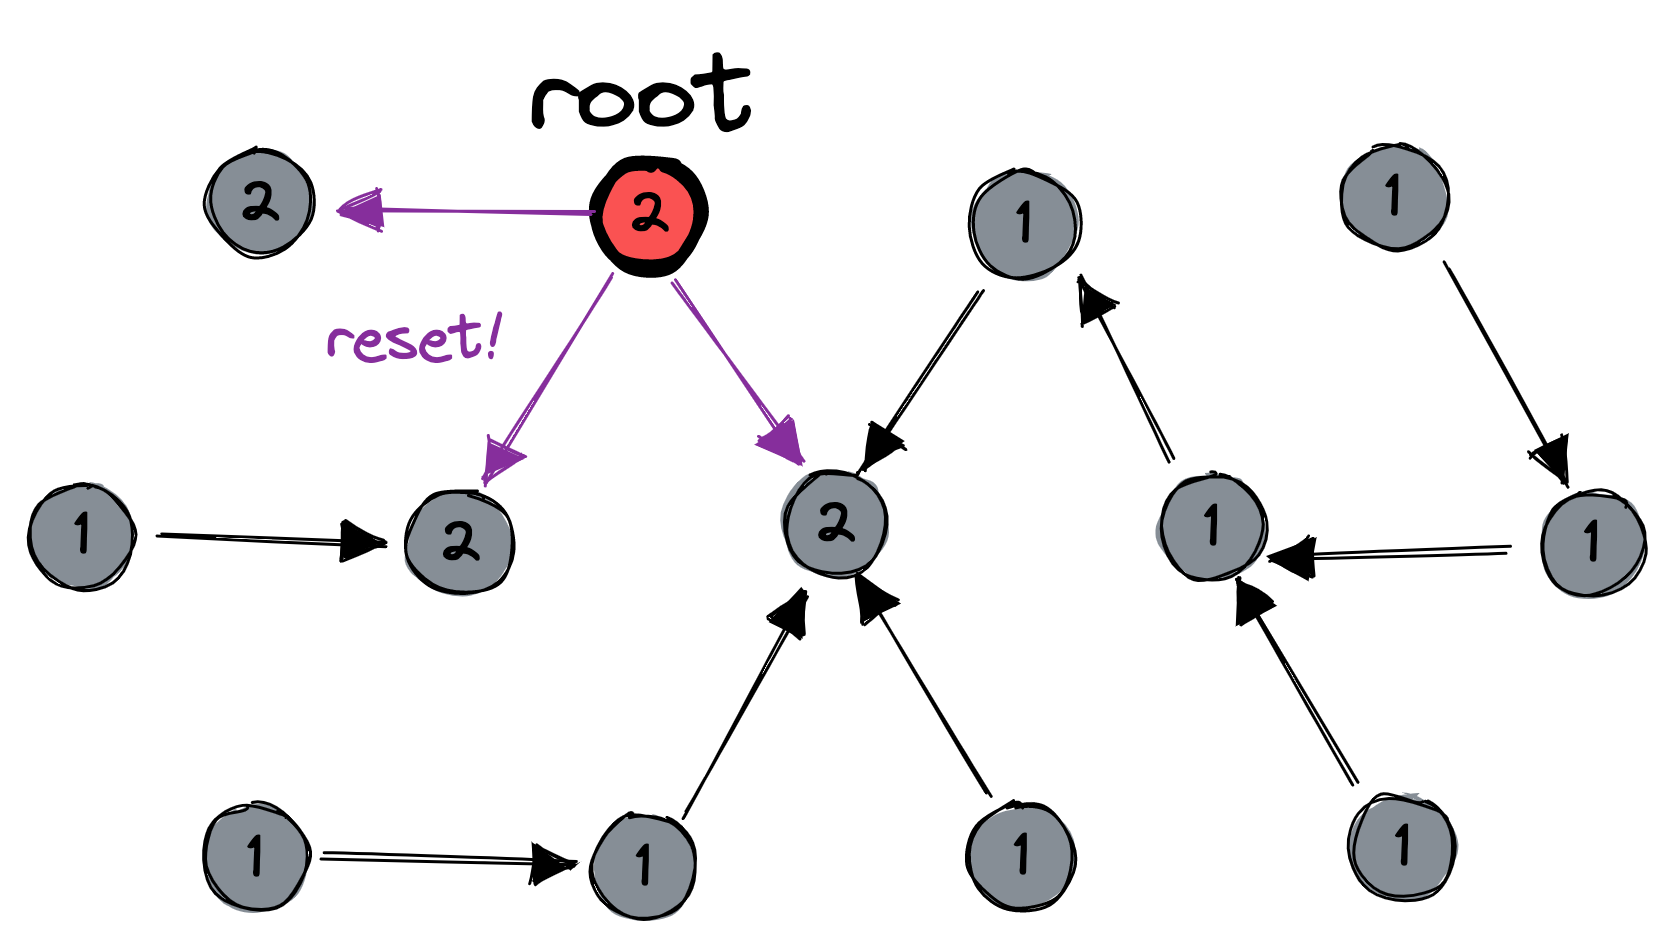 The root says “reset” to its children. The root and its immediate children are now labeled “two”.